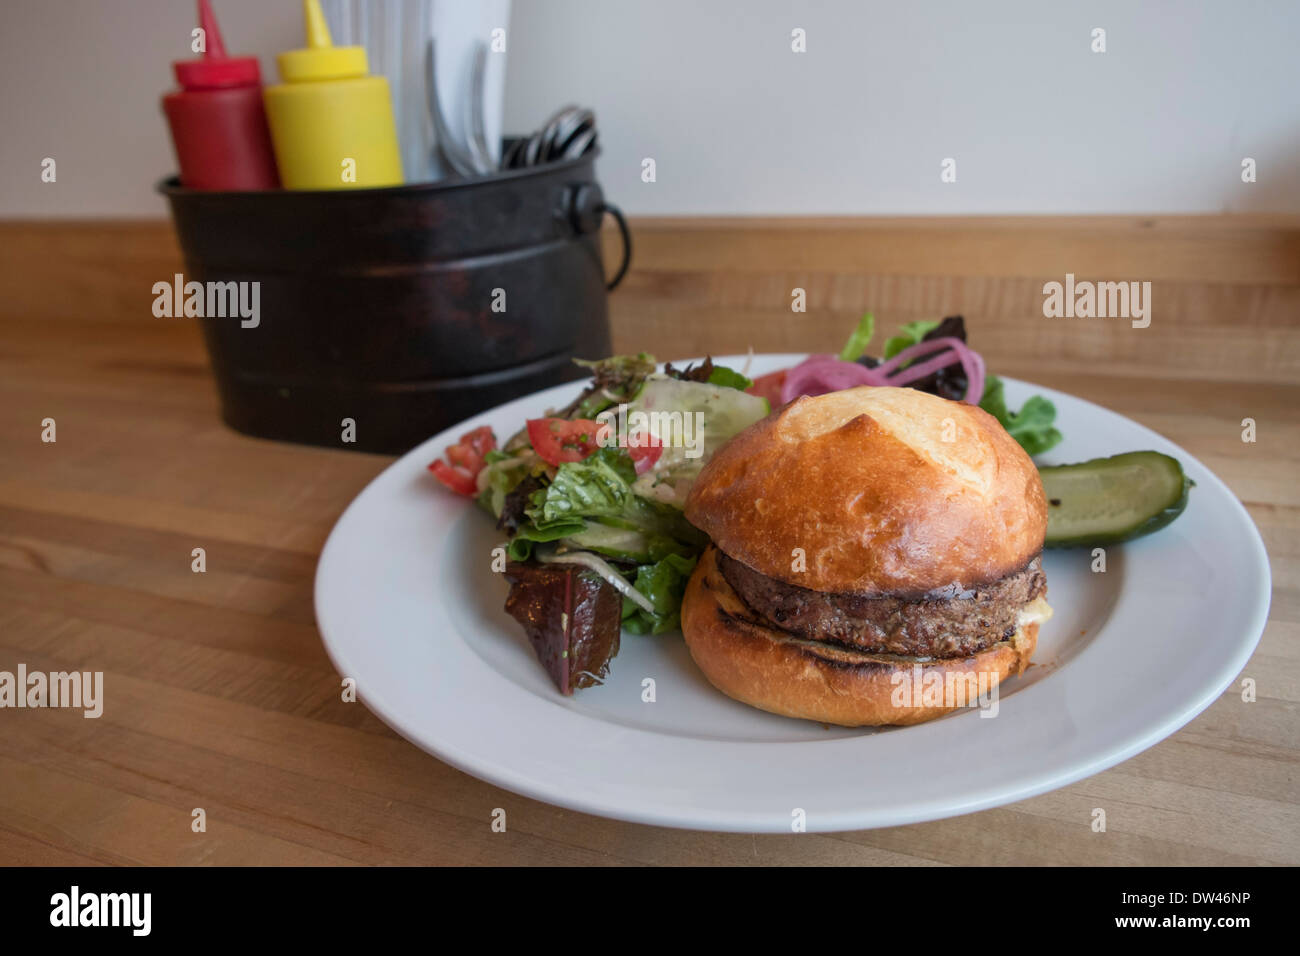 Hamburger sandwich and salad served on a plate Stock Photo